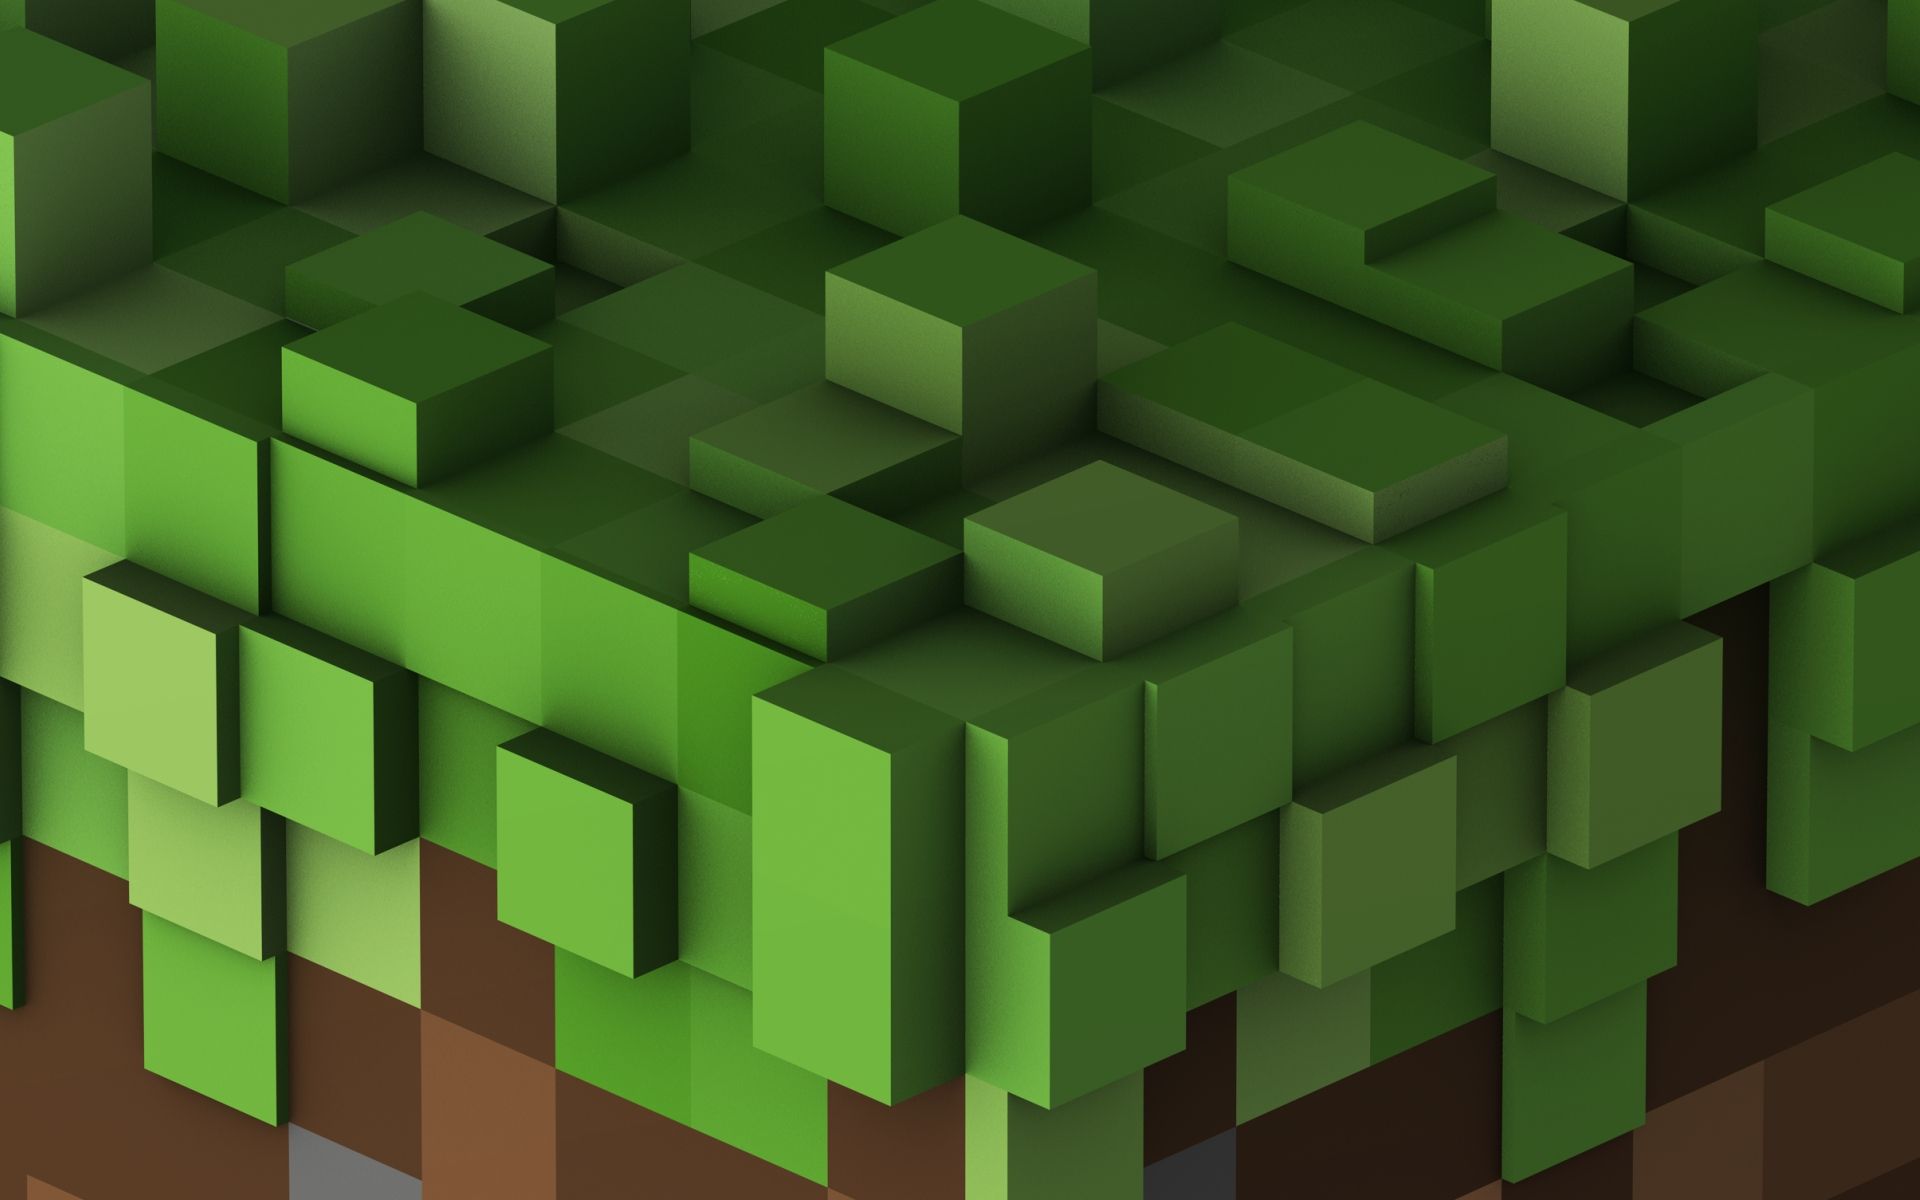 338 Minecraft HD Wallpapers Backgrounds - Wallpaper Abyss